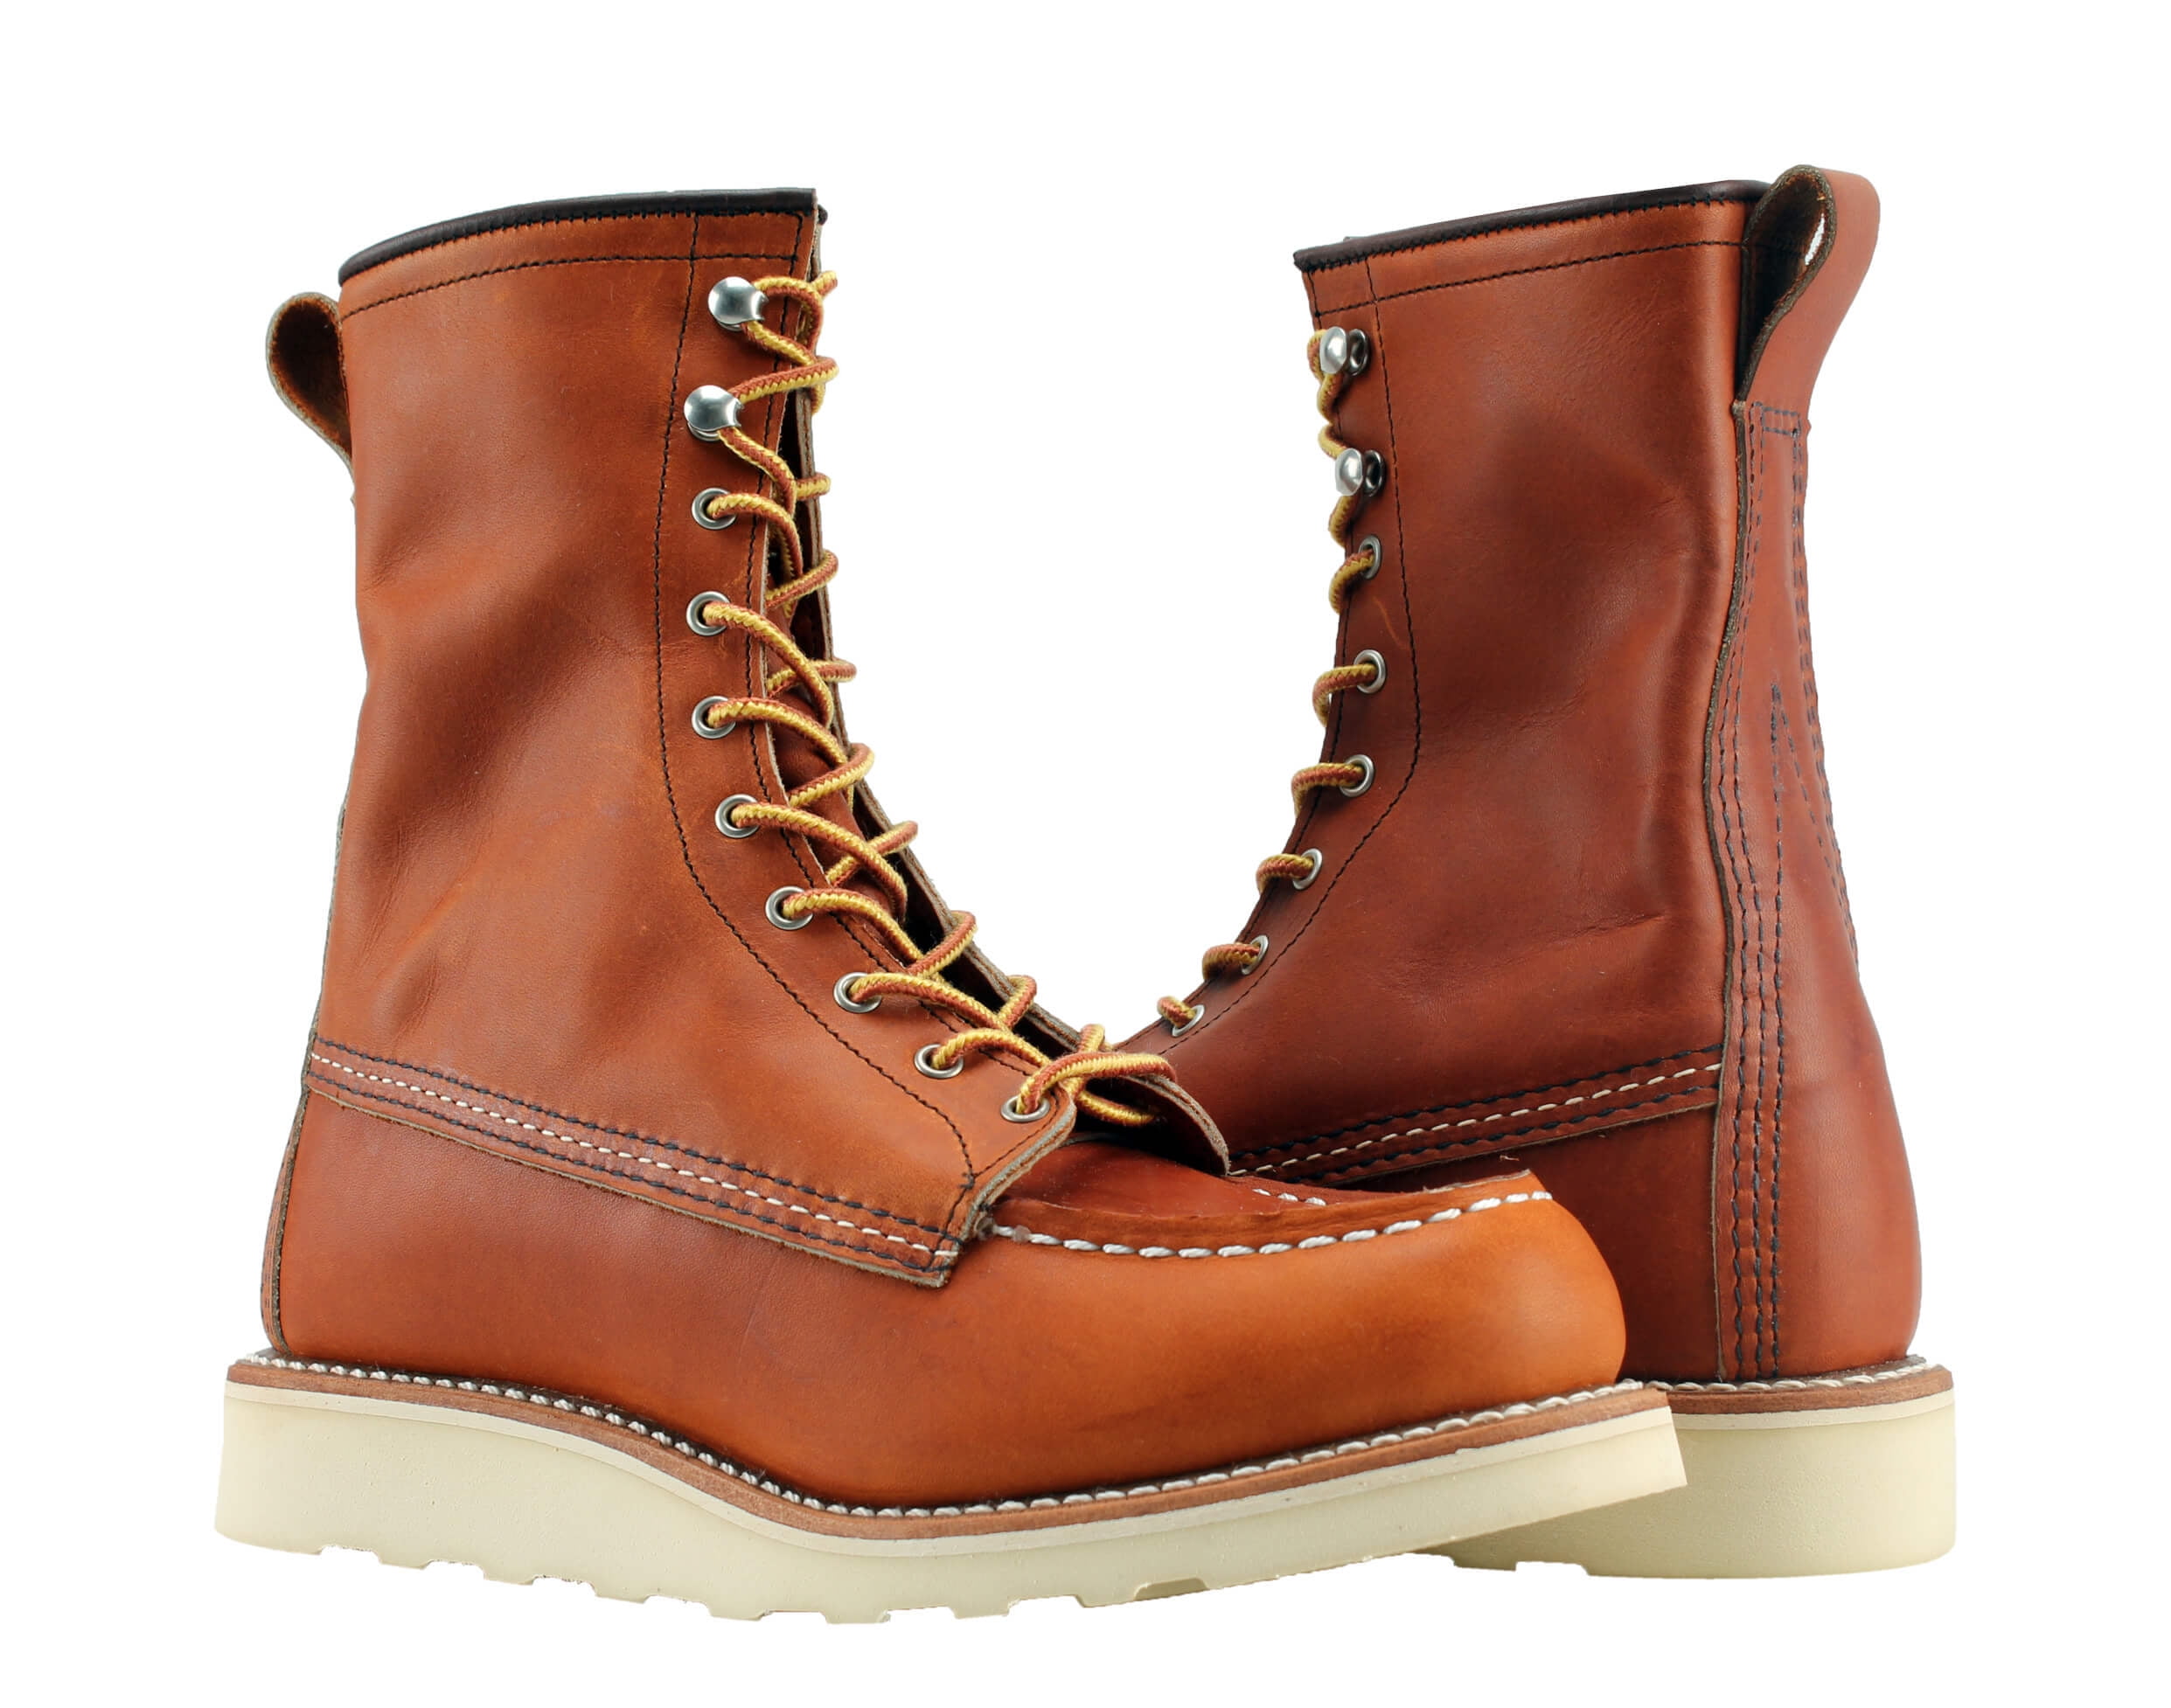 Discount red wing boots